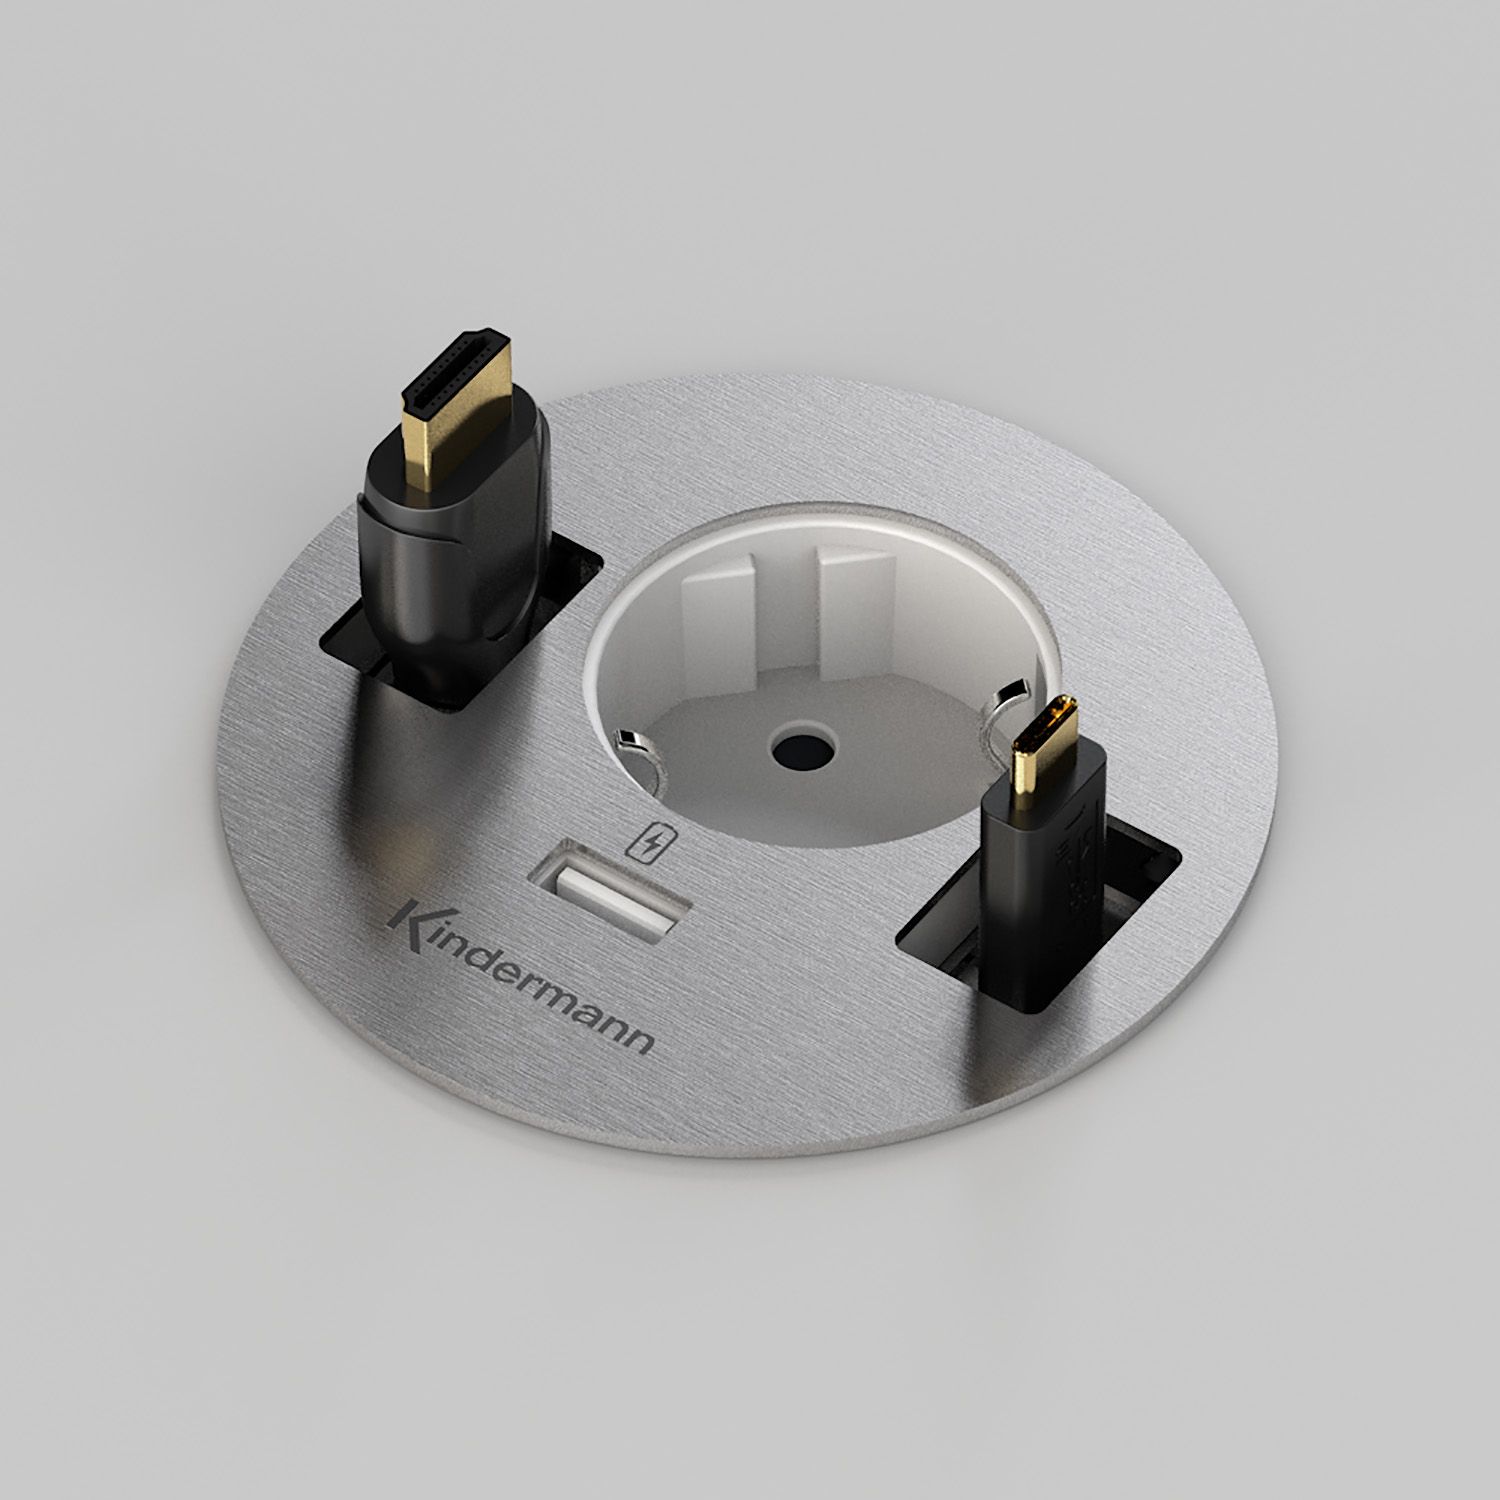 Kindermann CablePort table³ - 1x power - 1x USB-A - 2 free cable outlets - table connection panel - stainless steel